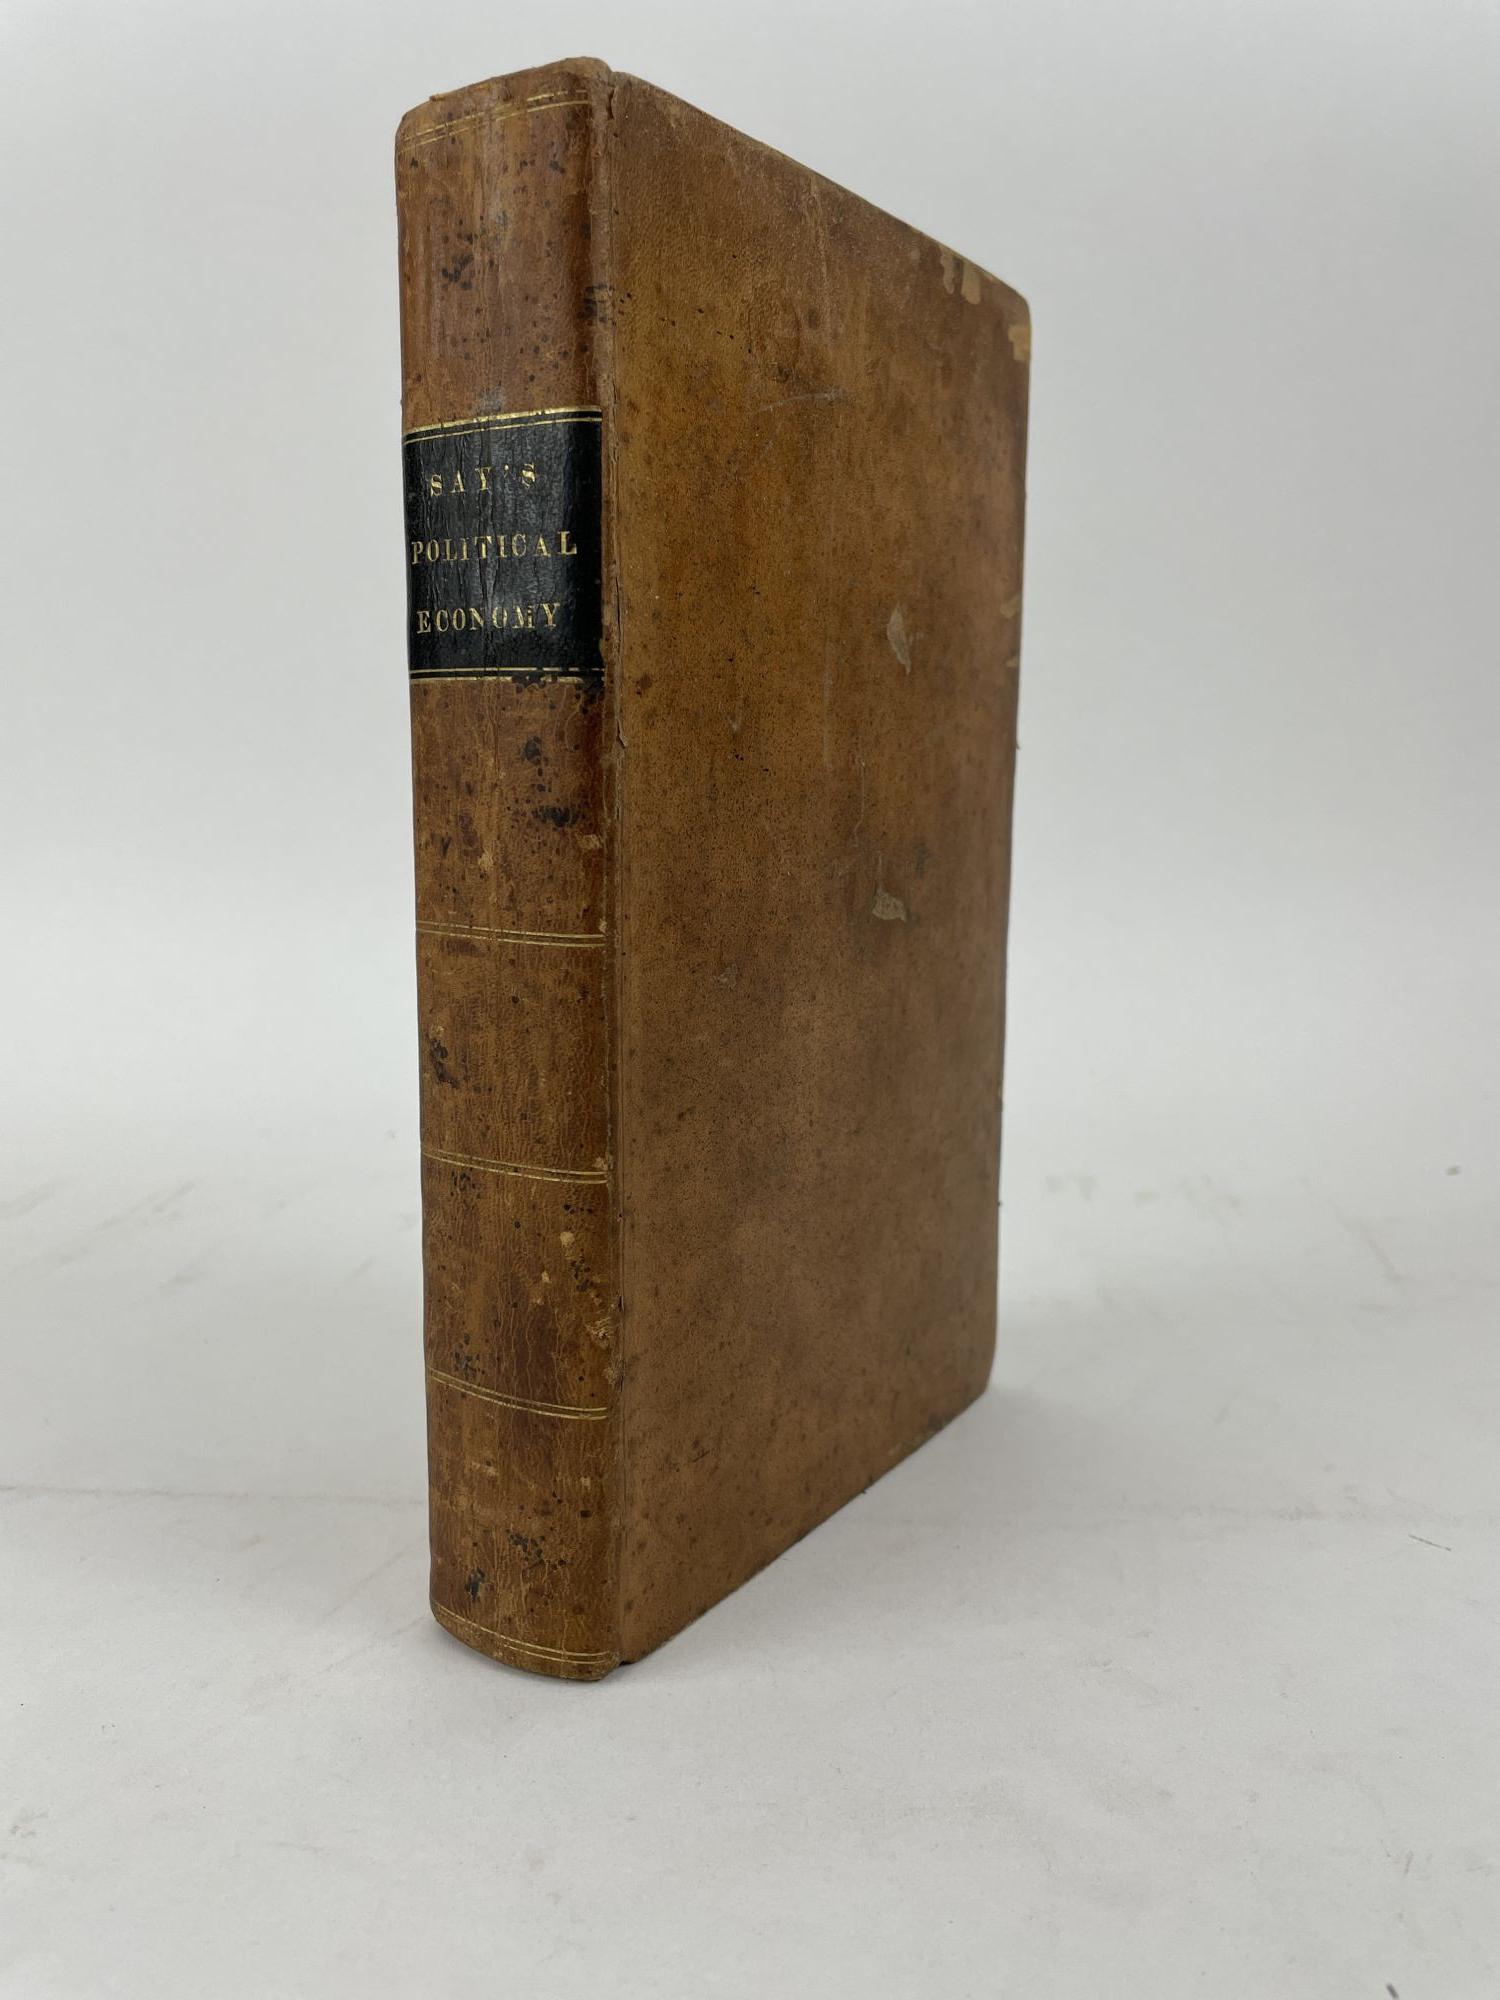 1354633 A TREATISE ON POLITICAL ECONOMY; OR THE PRODUCTION, DISTRIBUTION AND CONSUMPTION OF WEALTH [Copy belonging to Moses Greenleaf]. Jean-Baptiste Say, C. R. Prinsep.